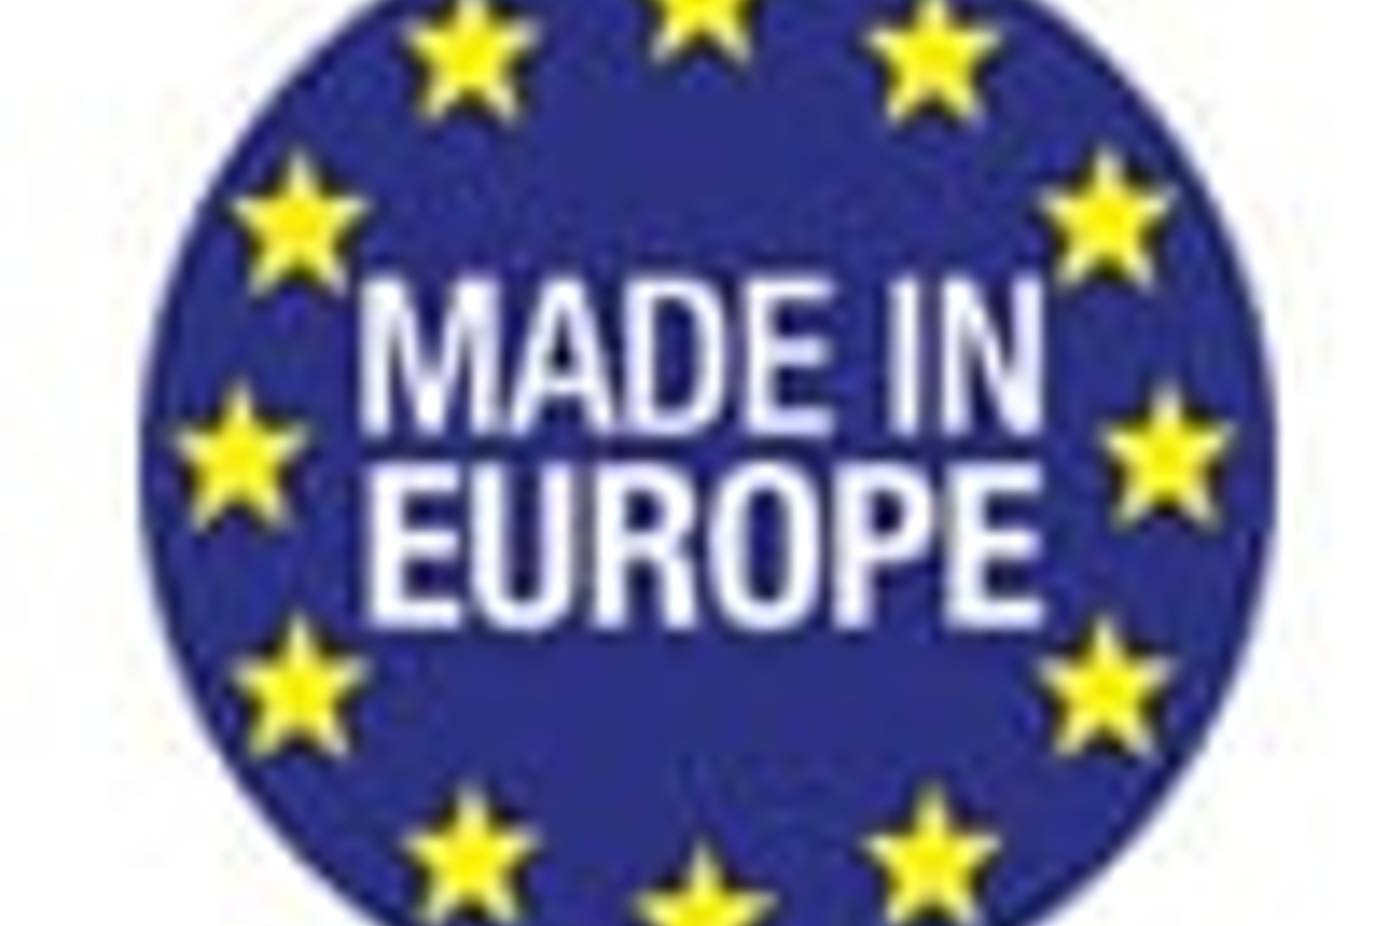 MADE IN EUROPE